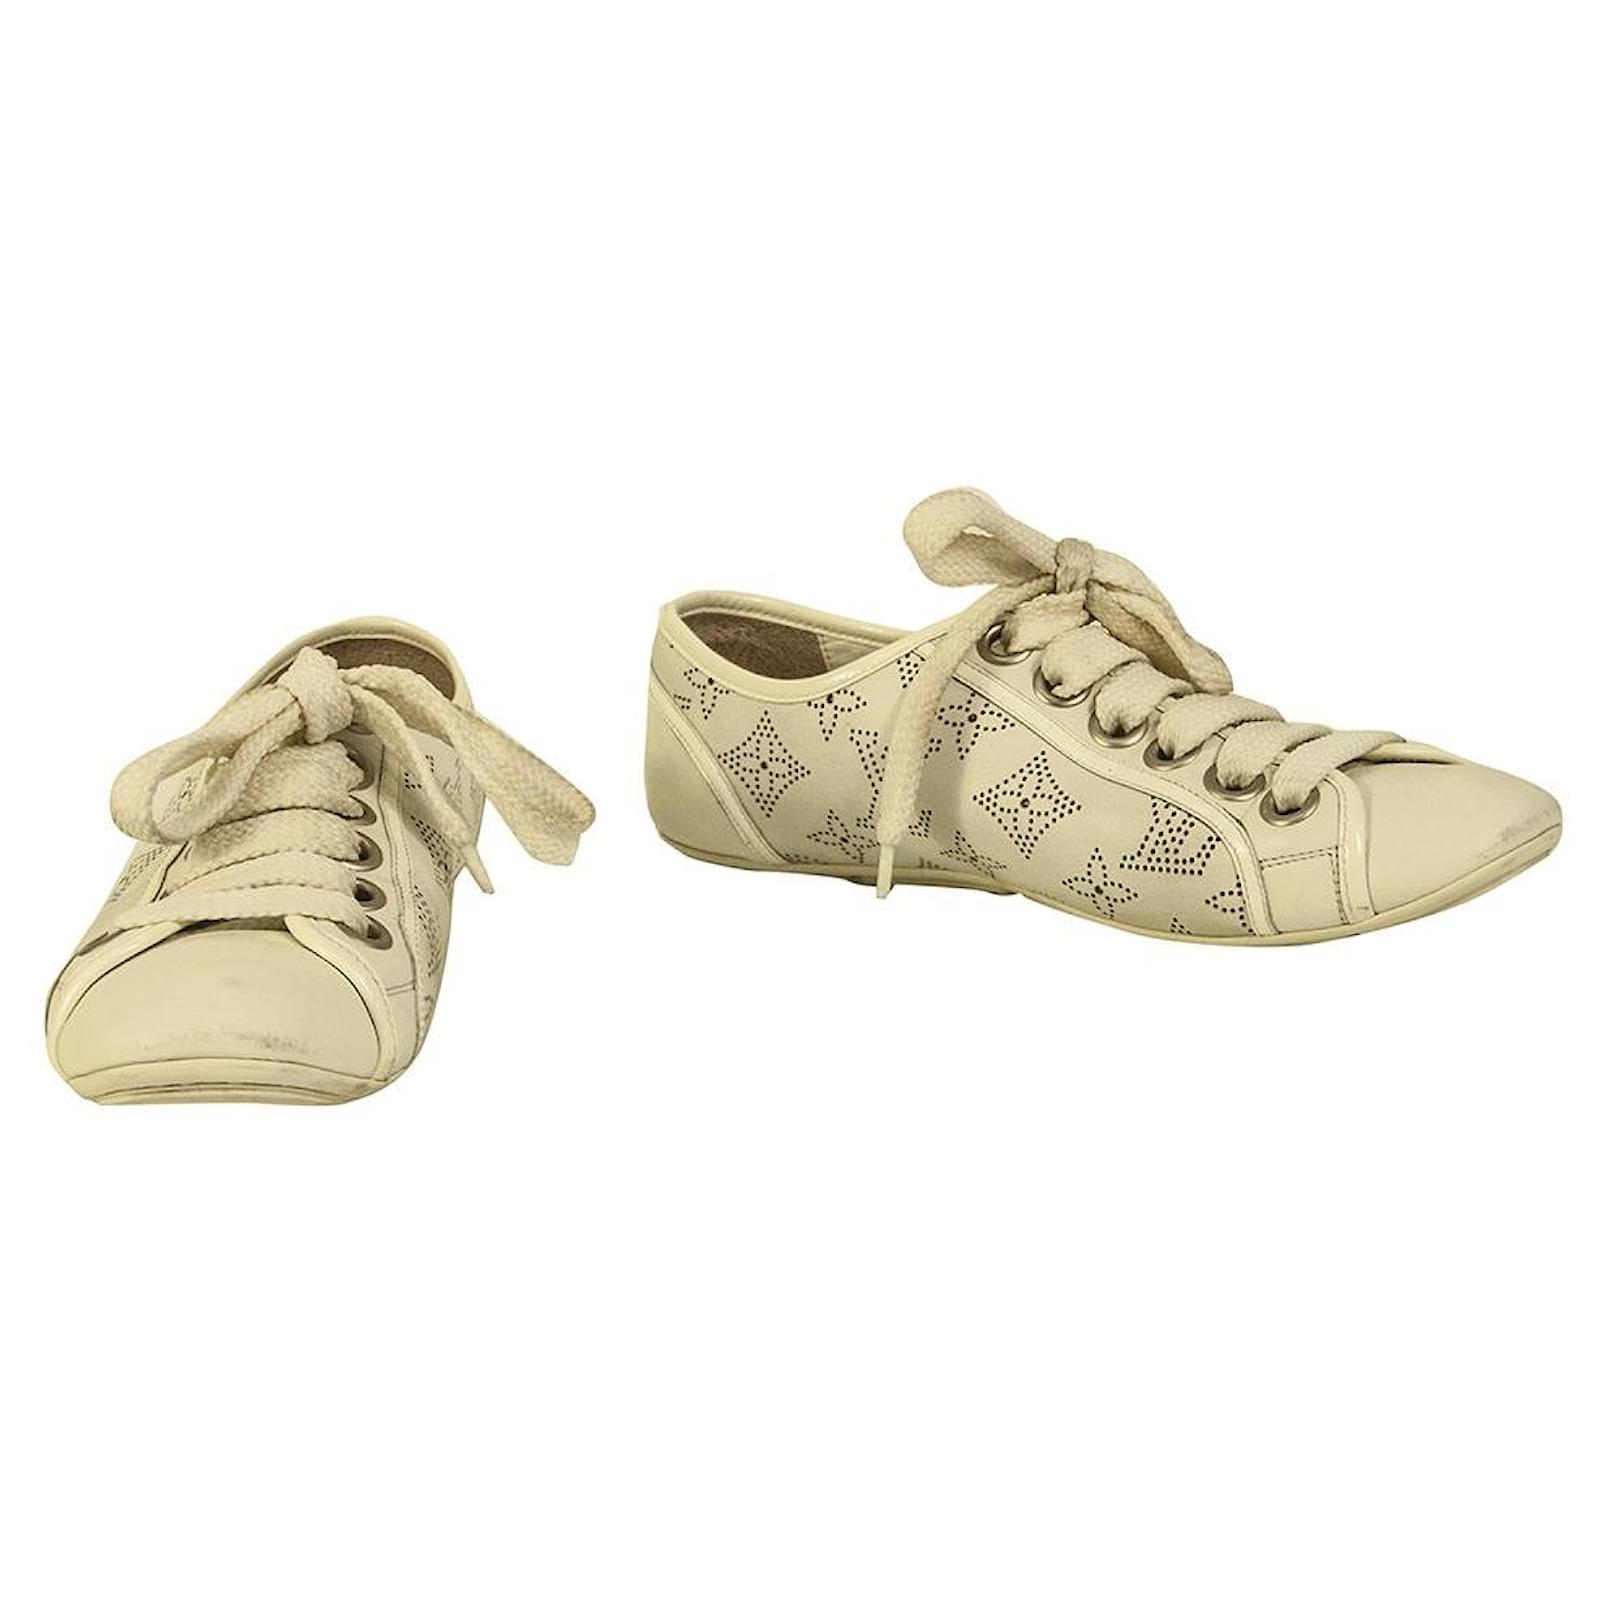 Louis Vuitton Mahina Leather Trainer Sneakers Ivory off White sz